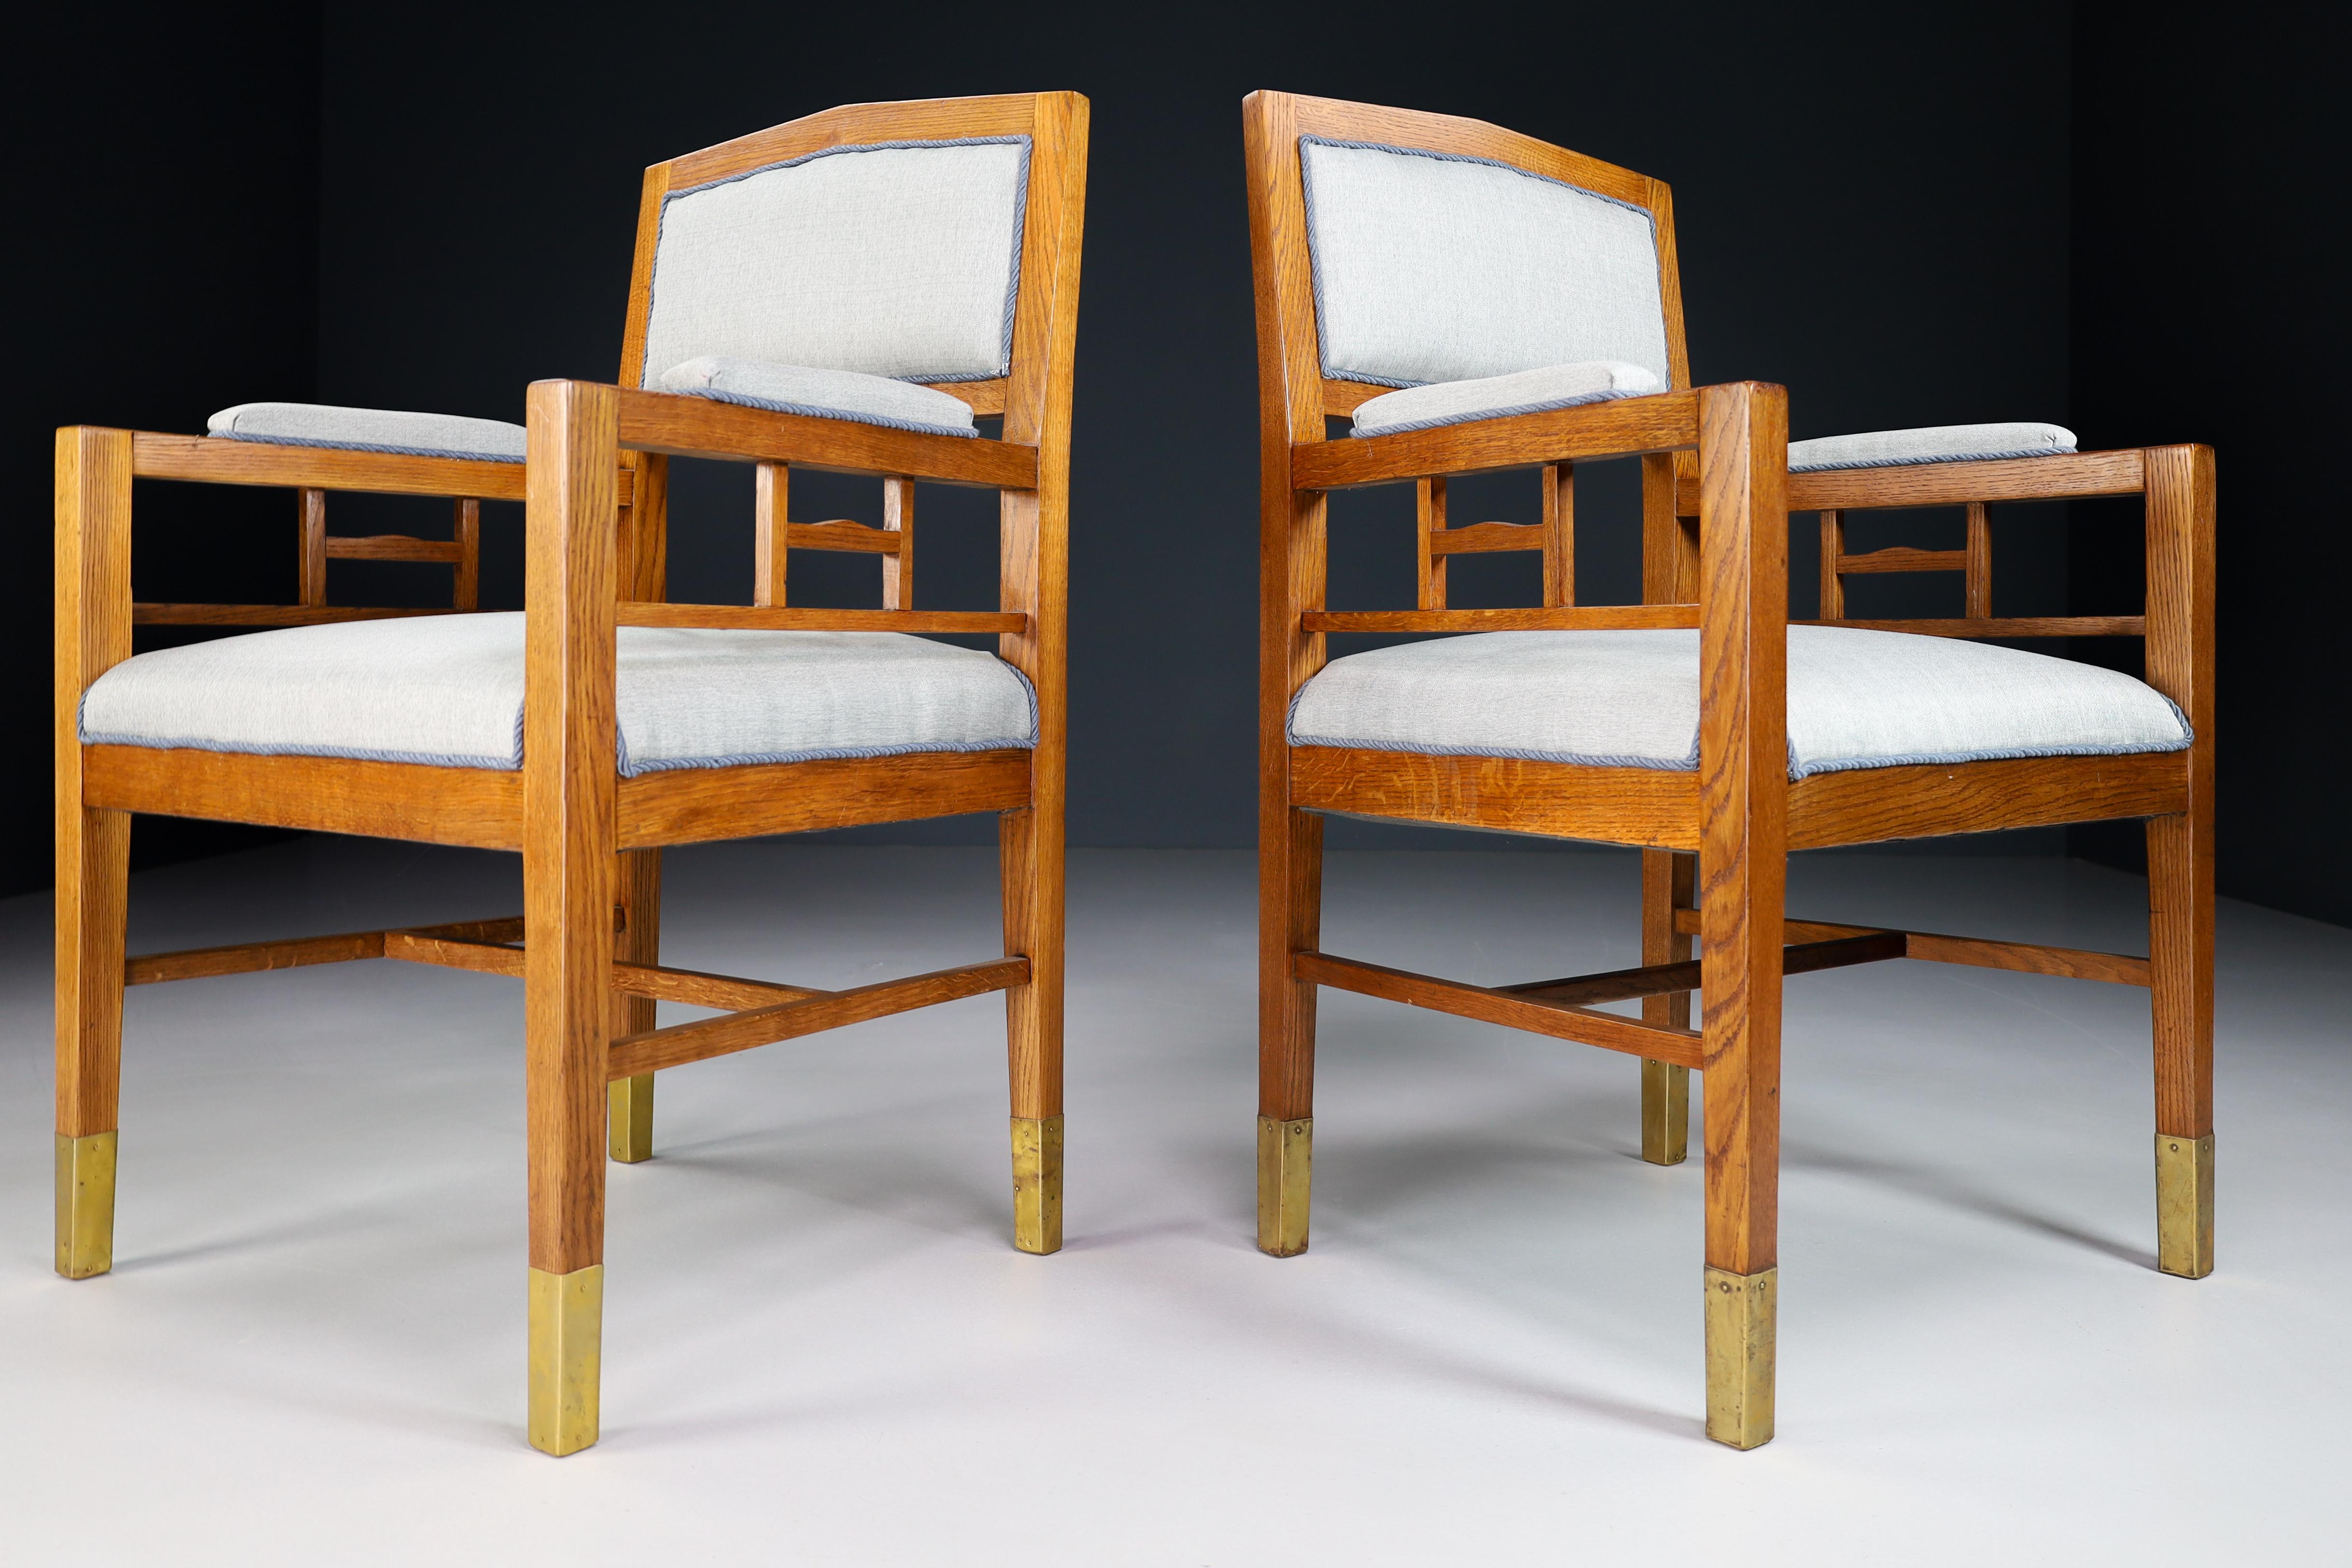 Pair of two Jugendstil / Art-Deco lounge / arm chairs, in Oak and Re-upholstered fabric, Austria 1920s. These armchairs would make an eye-catching addition to any interior such as living room, family room, screening room or even in the office. It